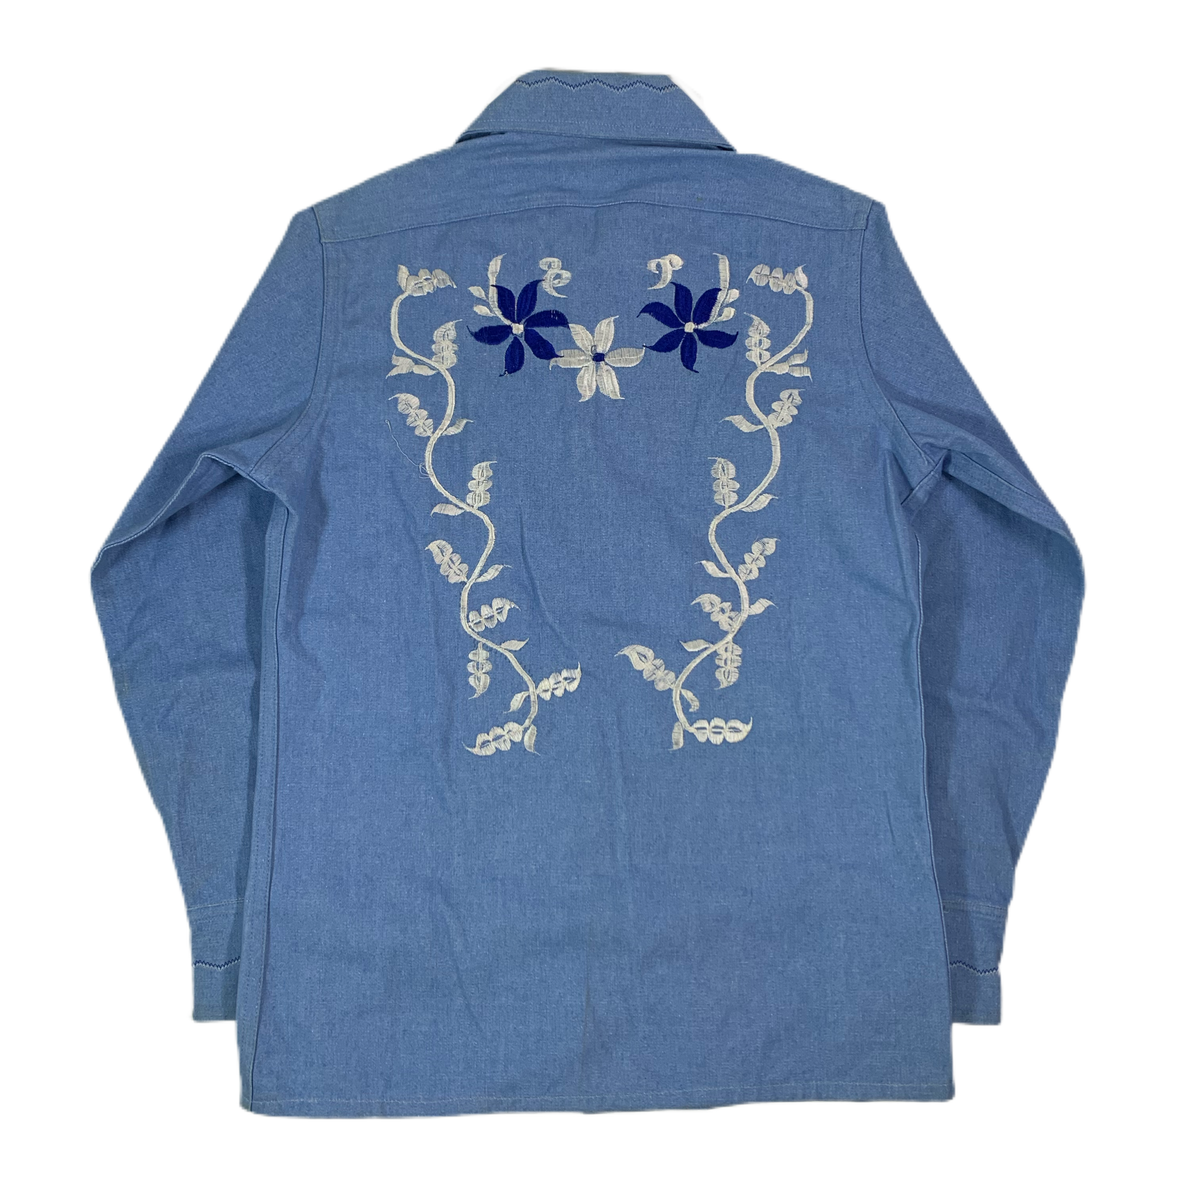 Vintage Embroidered Western Chambray “Made In Mexico” Pearl Snap Shirt - jointcustodydc